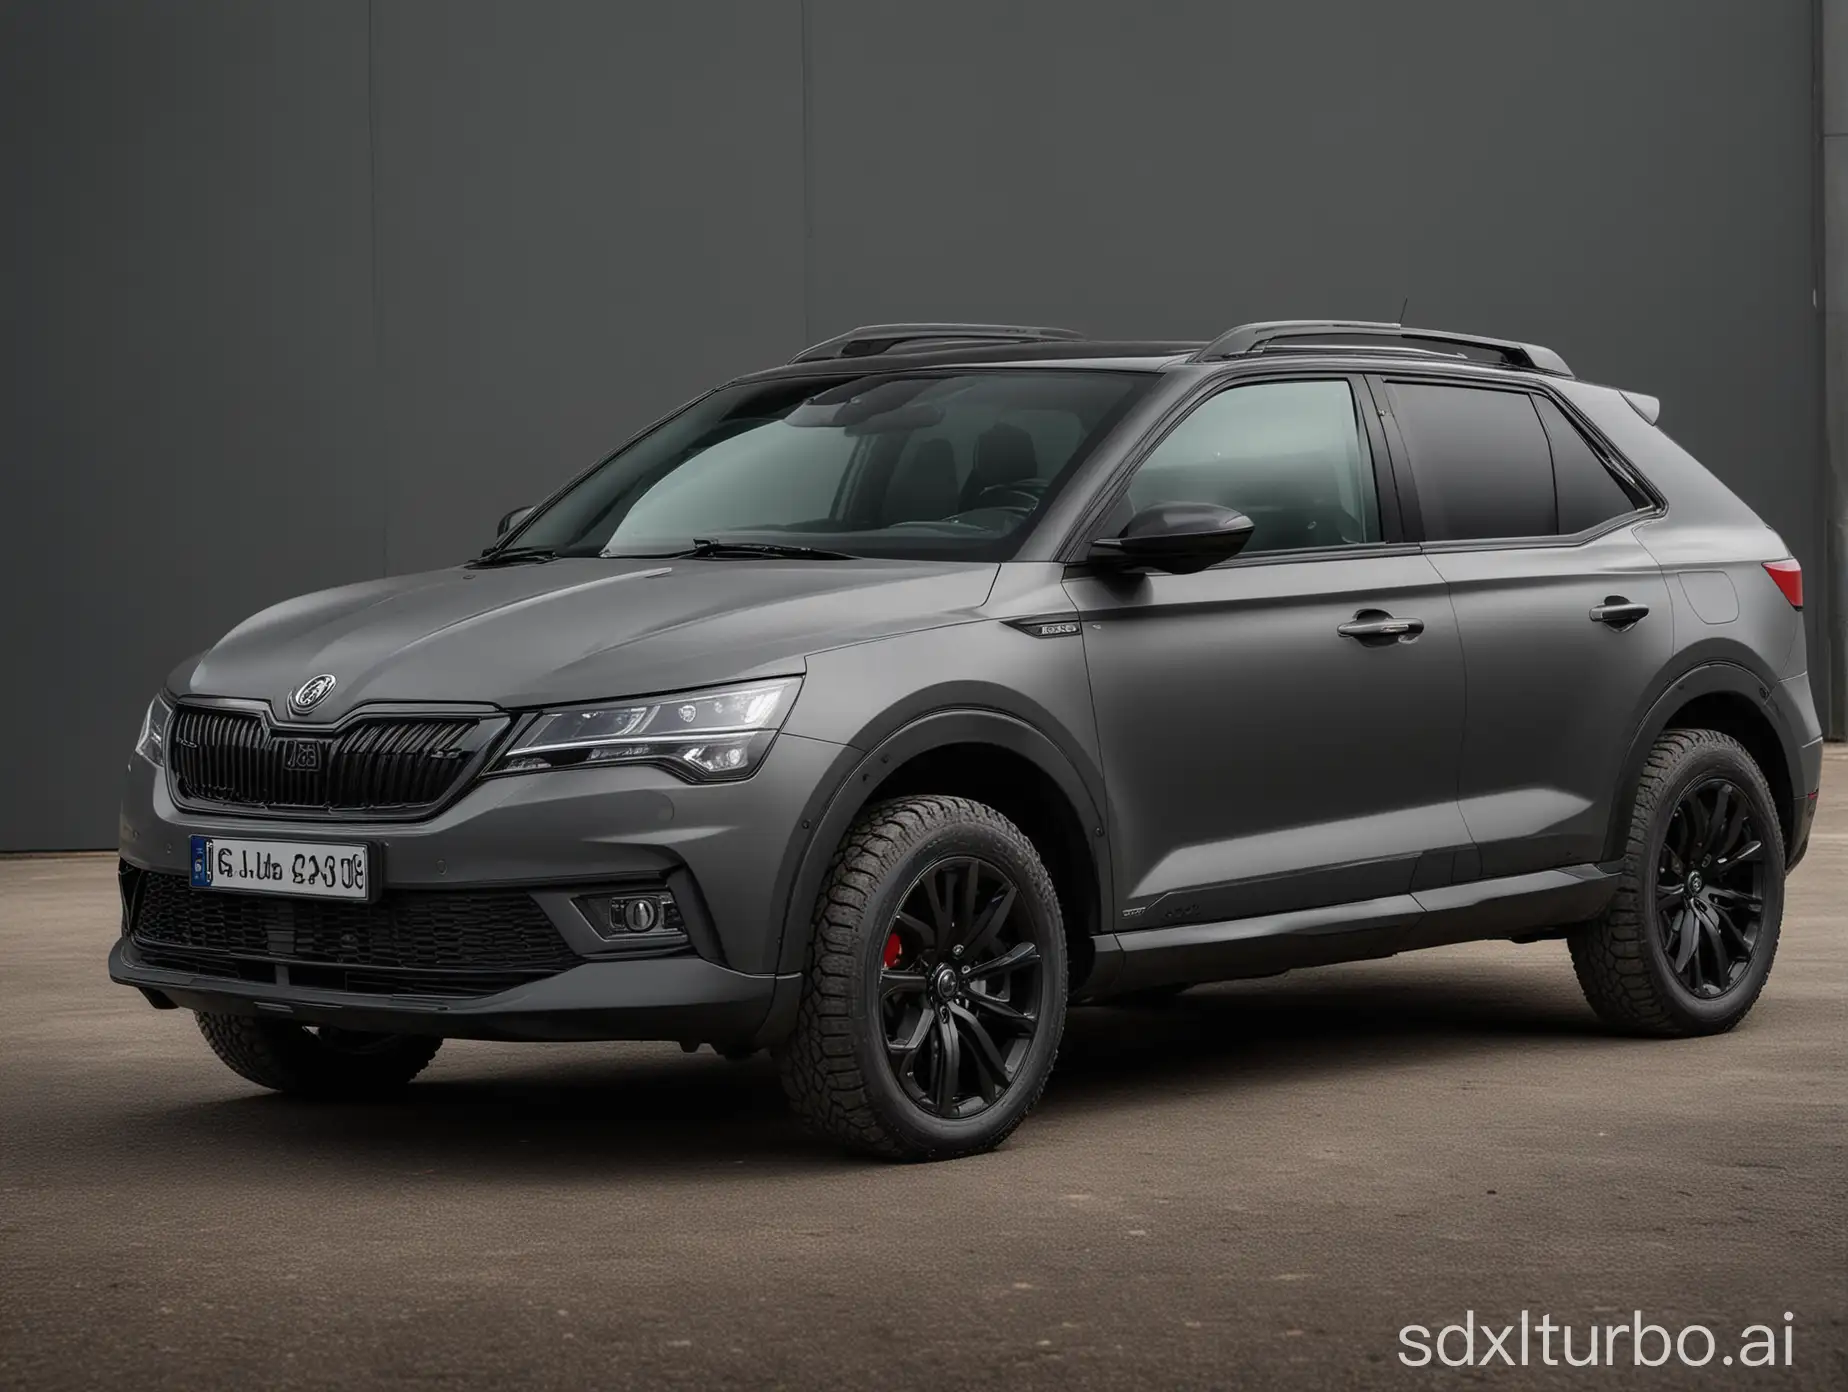 professional portrait shot of Skoda Camiq, model 2019. Dark matte Ash grey paint. Equipped with Off road front bumper. off road wheels, off road roof racks, off road running board